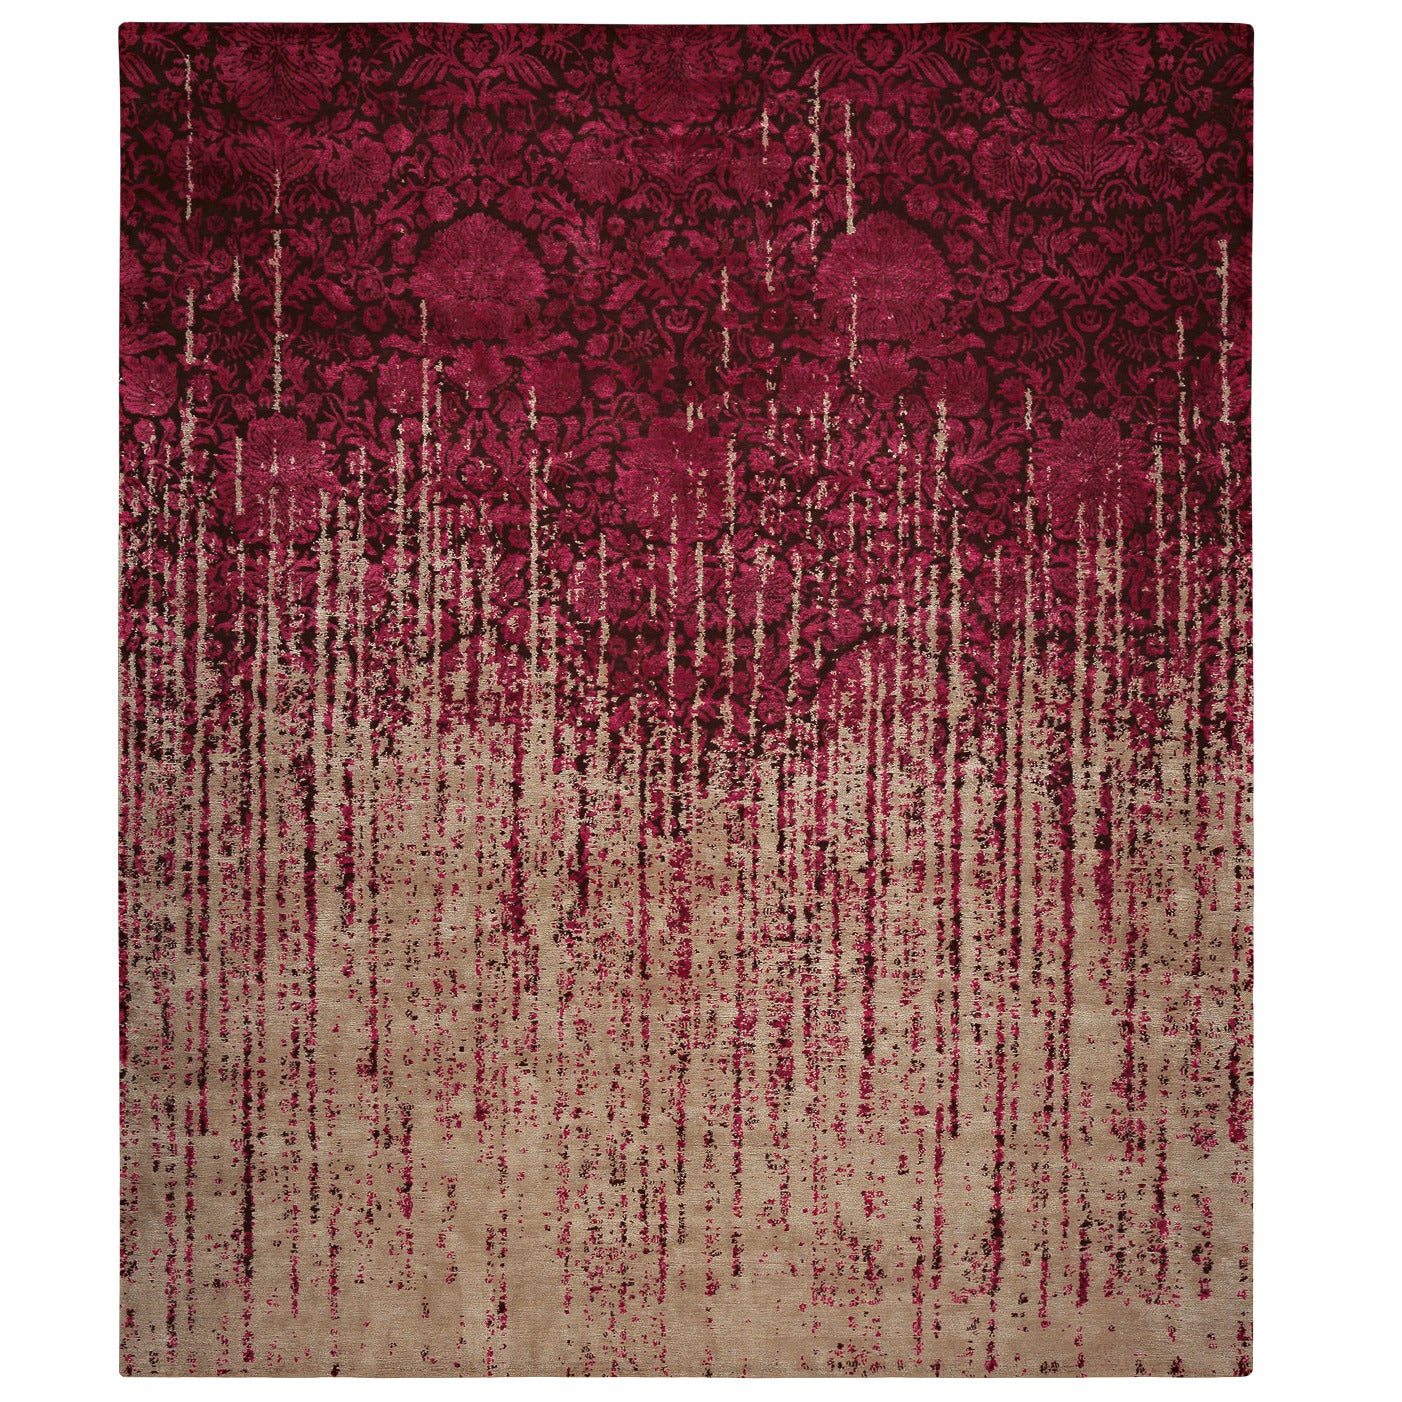 Verona Vendetta from the Erased Classics Carpet Collection by Jan Kath For Sale